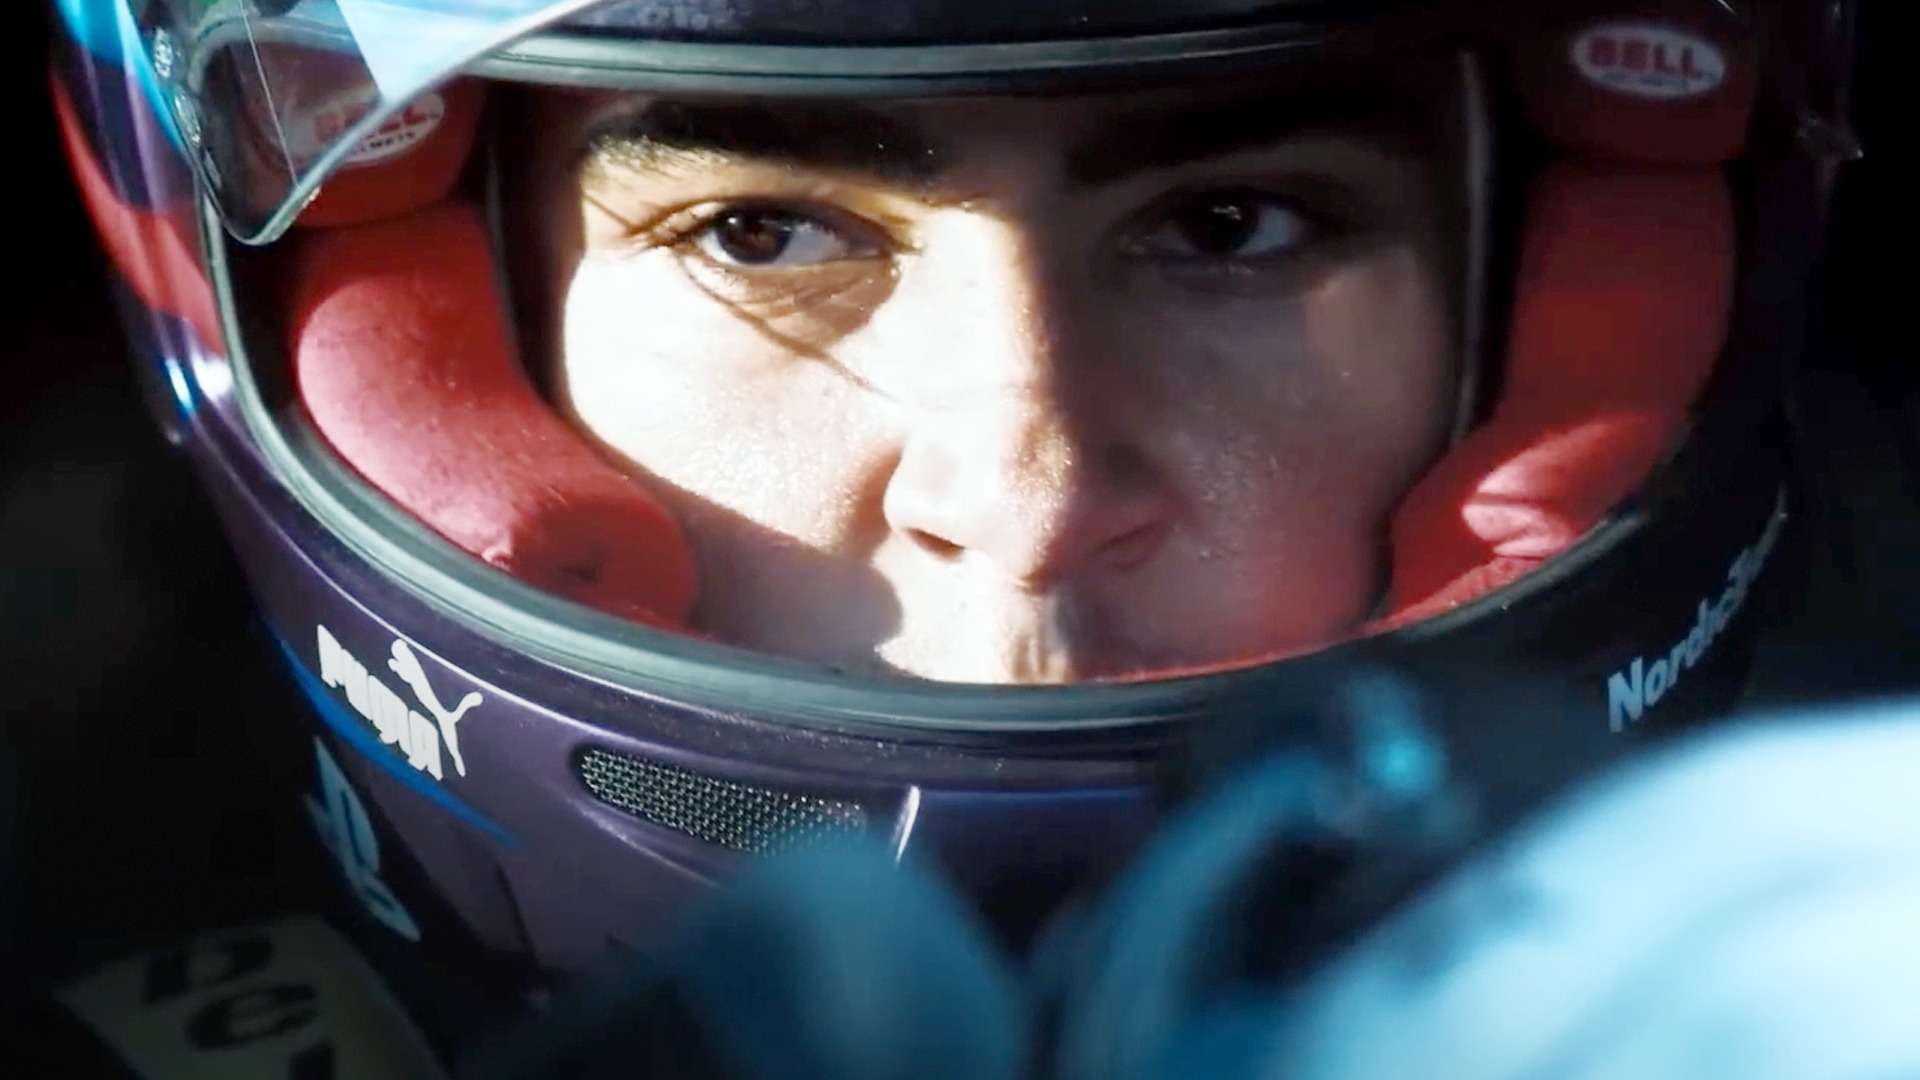 Bell Racing Helmets teams up with the film GRAN TURISMO - Blog